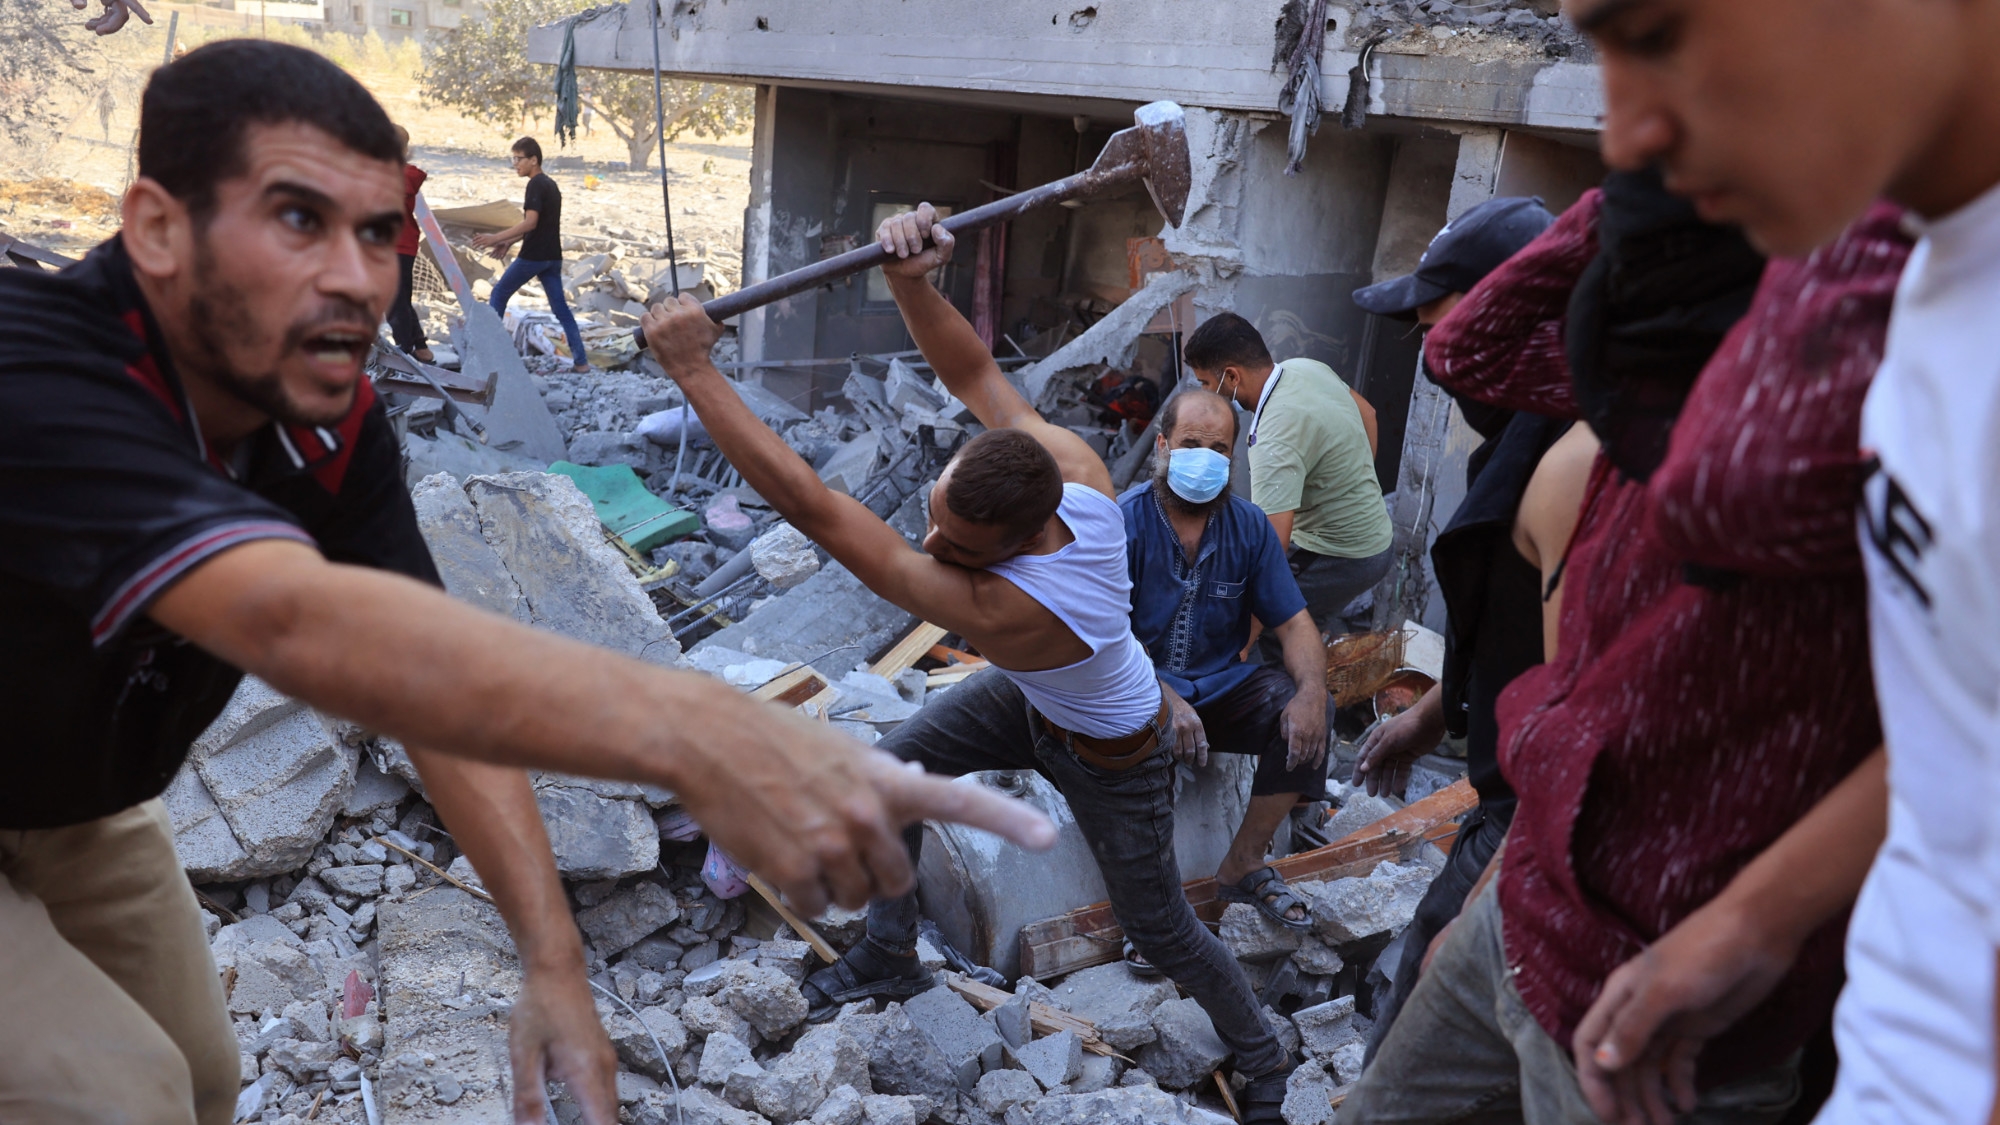 War on Gaza: Estimated 10,000 Palestinians buried under rubble, civil defence says